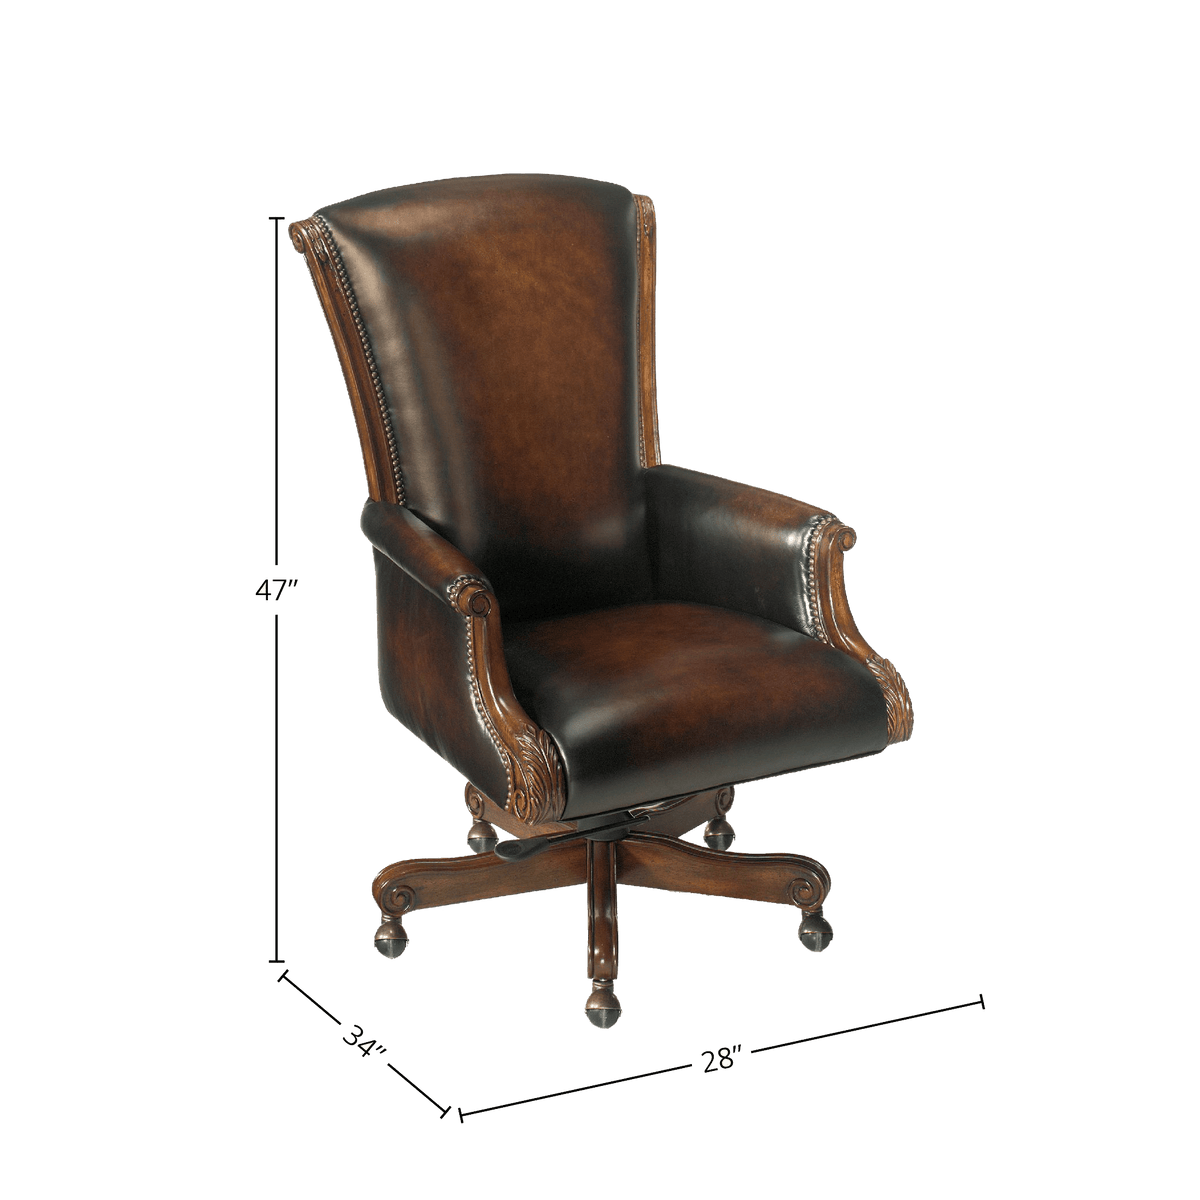 Stetson Leather Office Chair, Brown - Coja